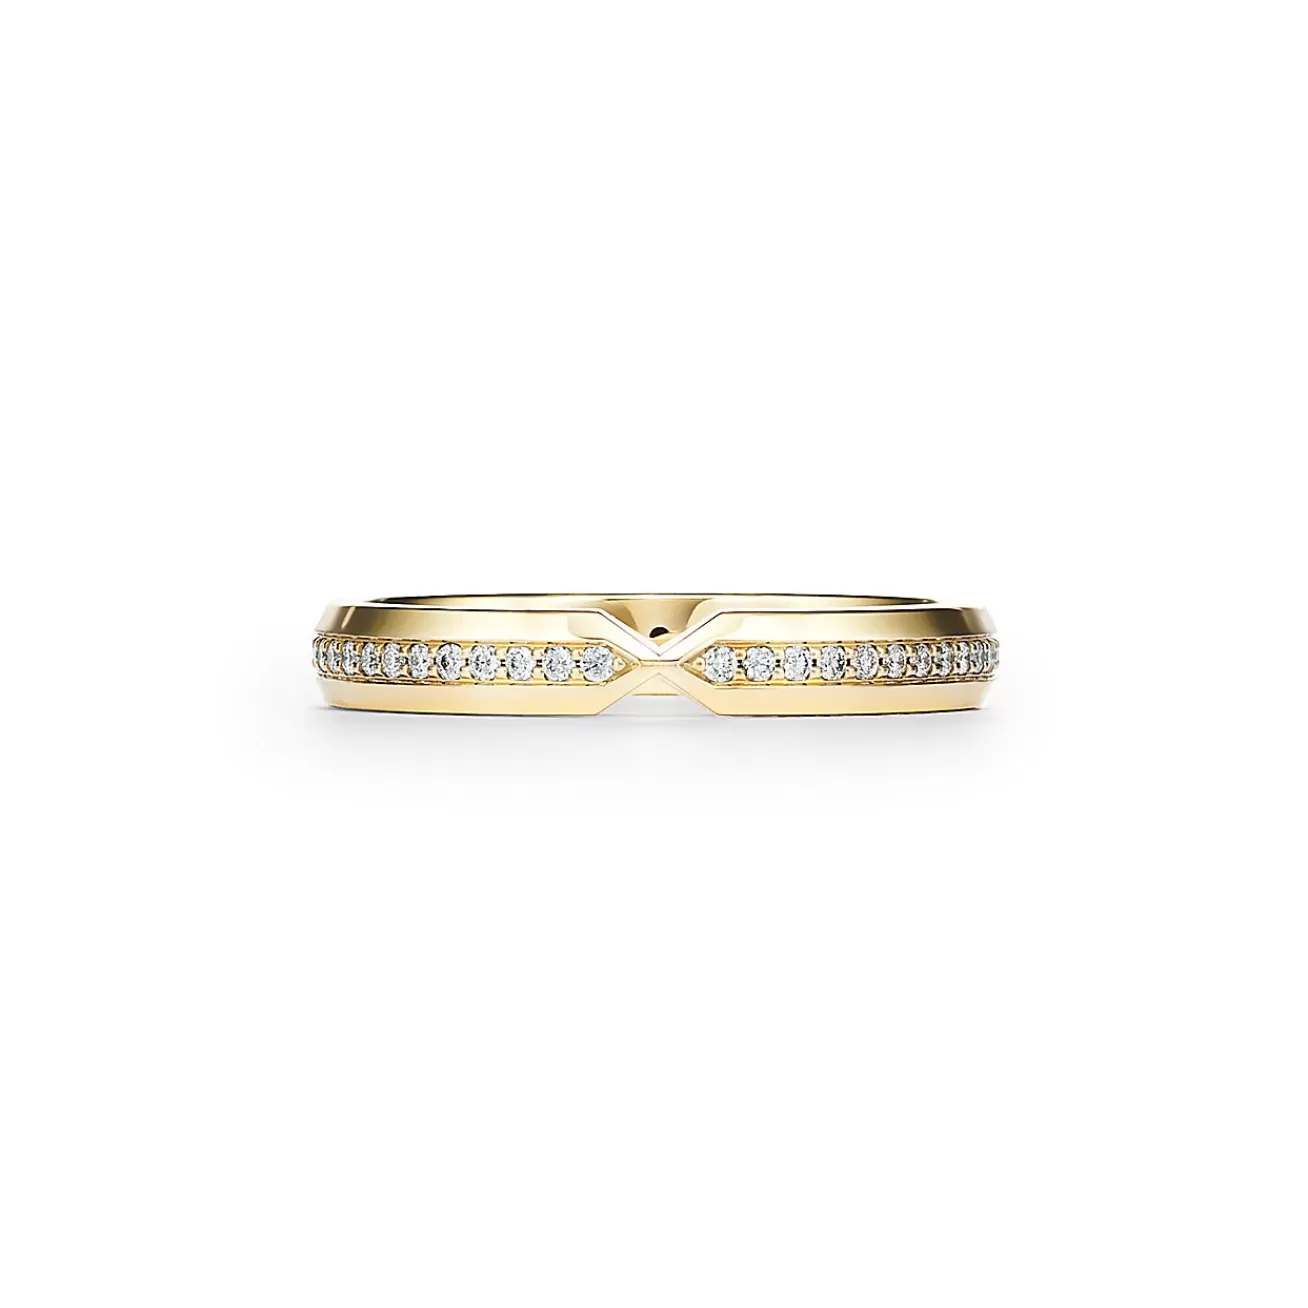 Tiffany & Co. The Tiffany® Setting nesting narrow band ring in 18k gold with diamonds. | ^ Rings | Gold Jewelry